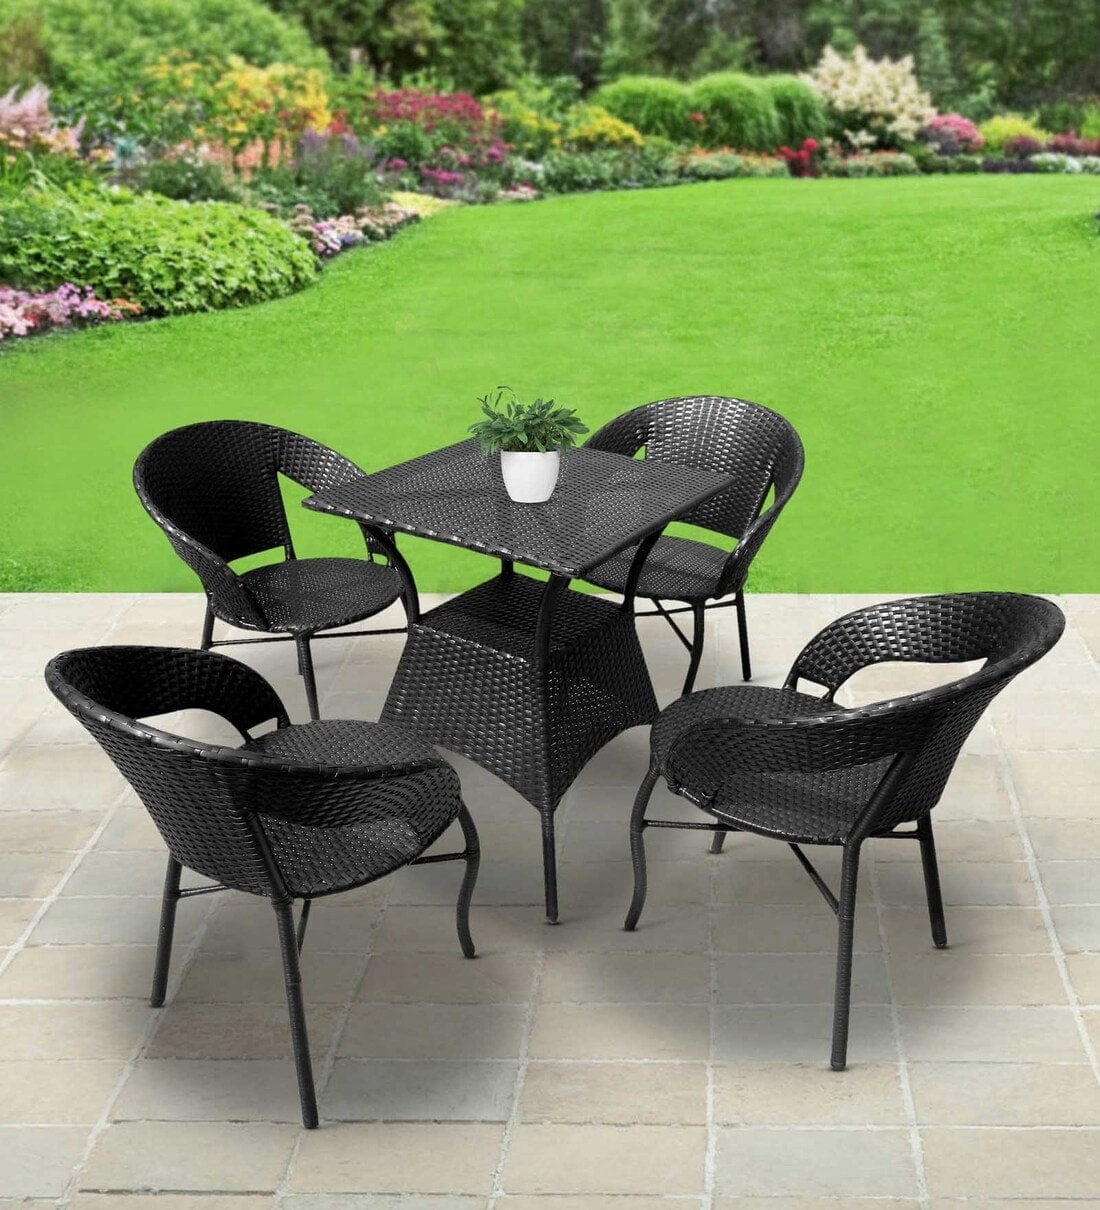 Dreamline Outdoor Furniture Garden Patio Balcony Furniture - 4 Chairs And Table Set (Black)